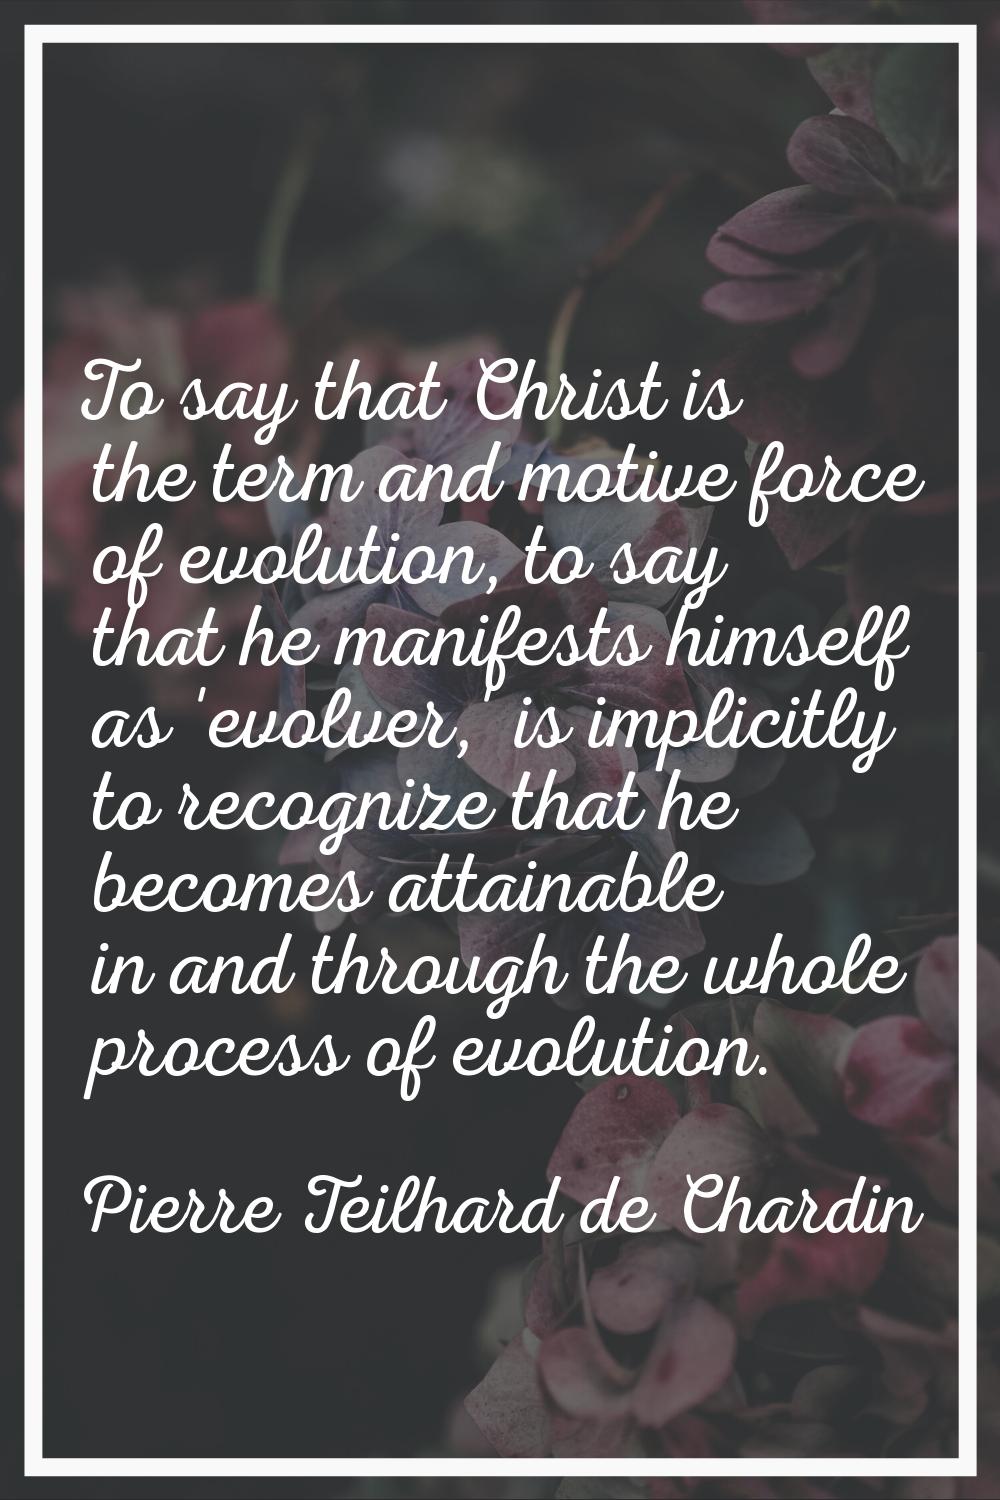 To say that Christ is the term and motive force of evolution, to say that he manifests himself as '